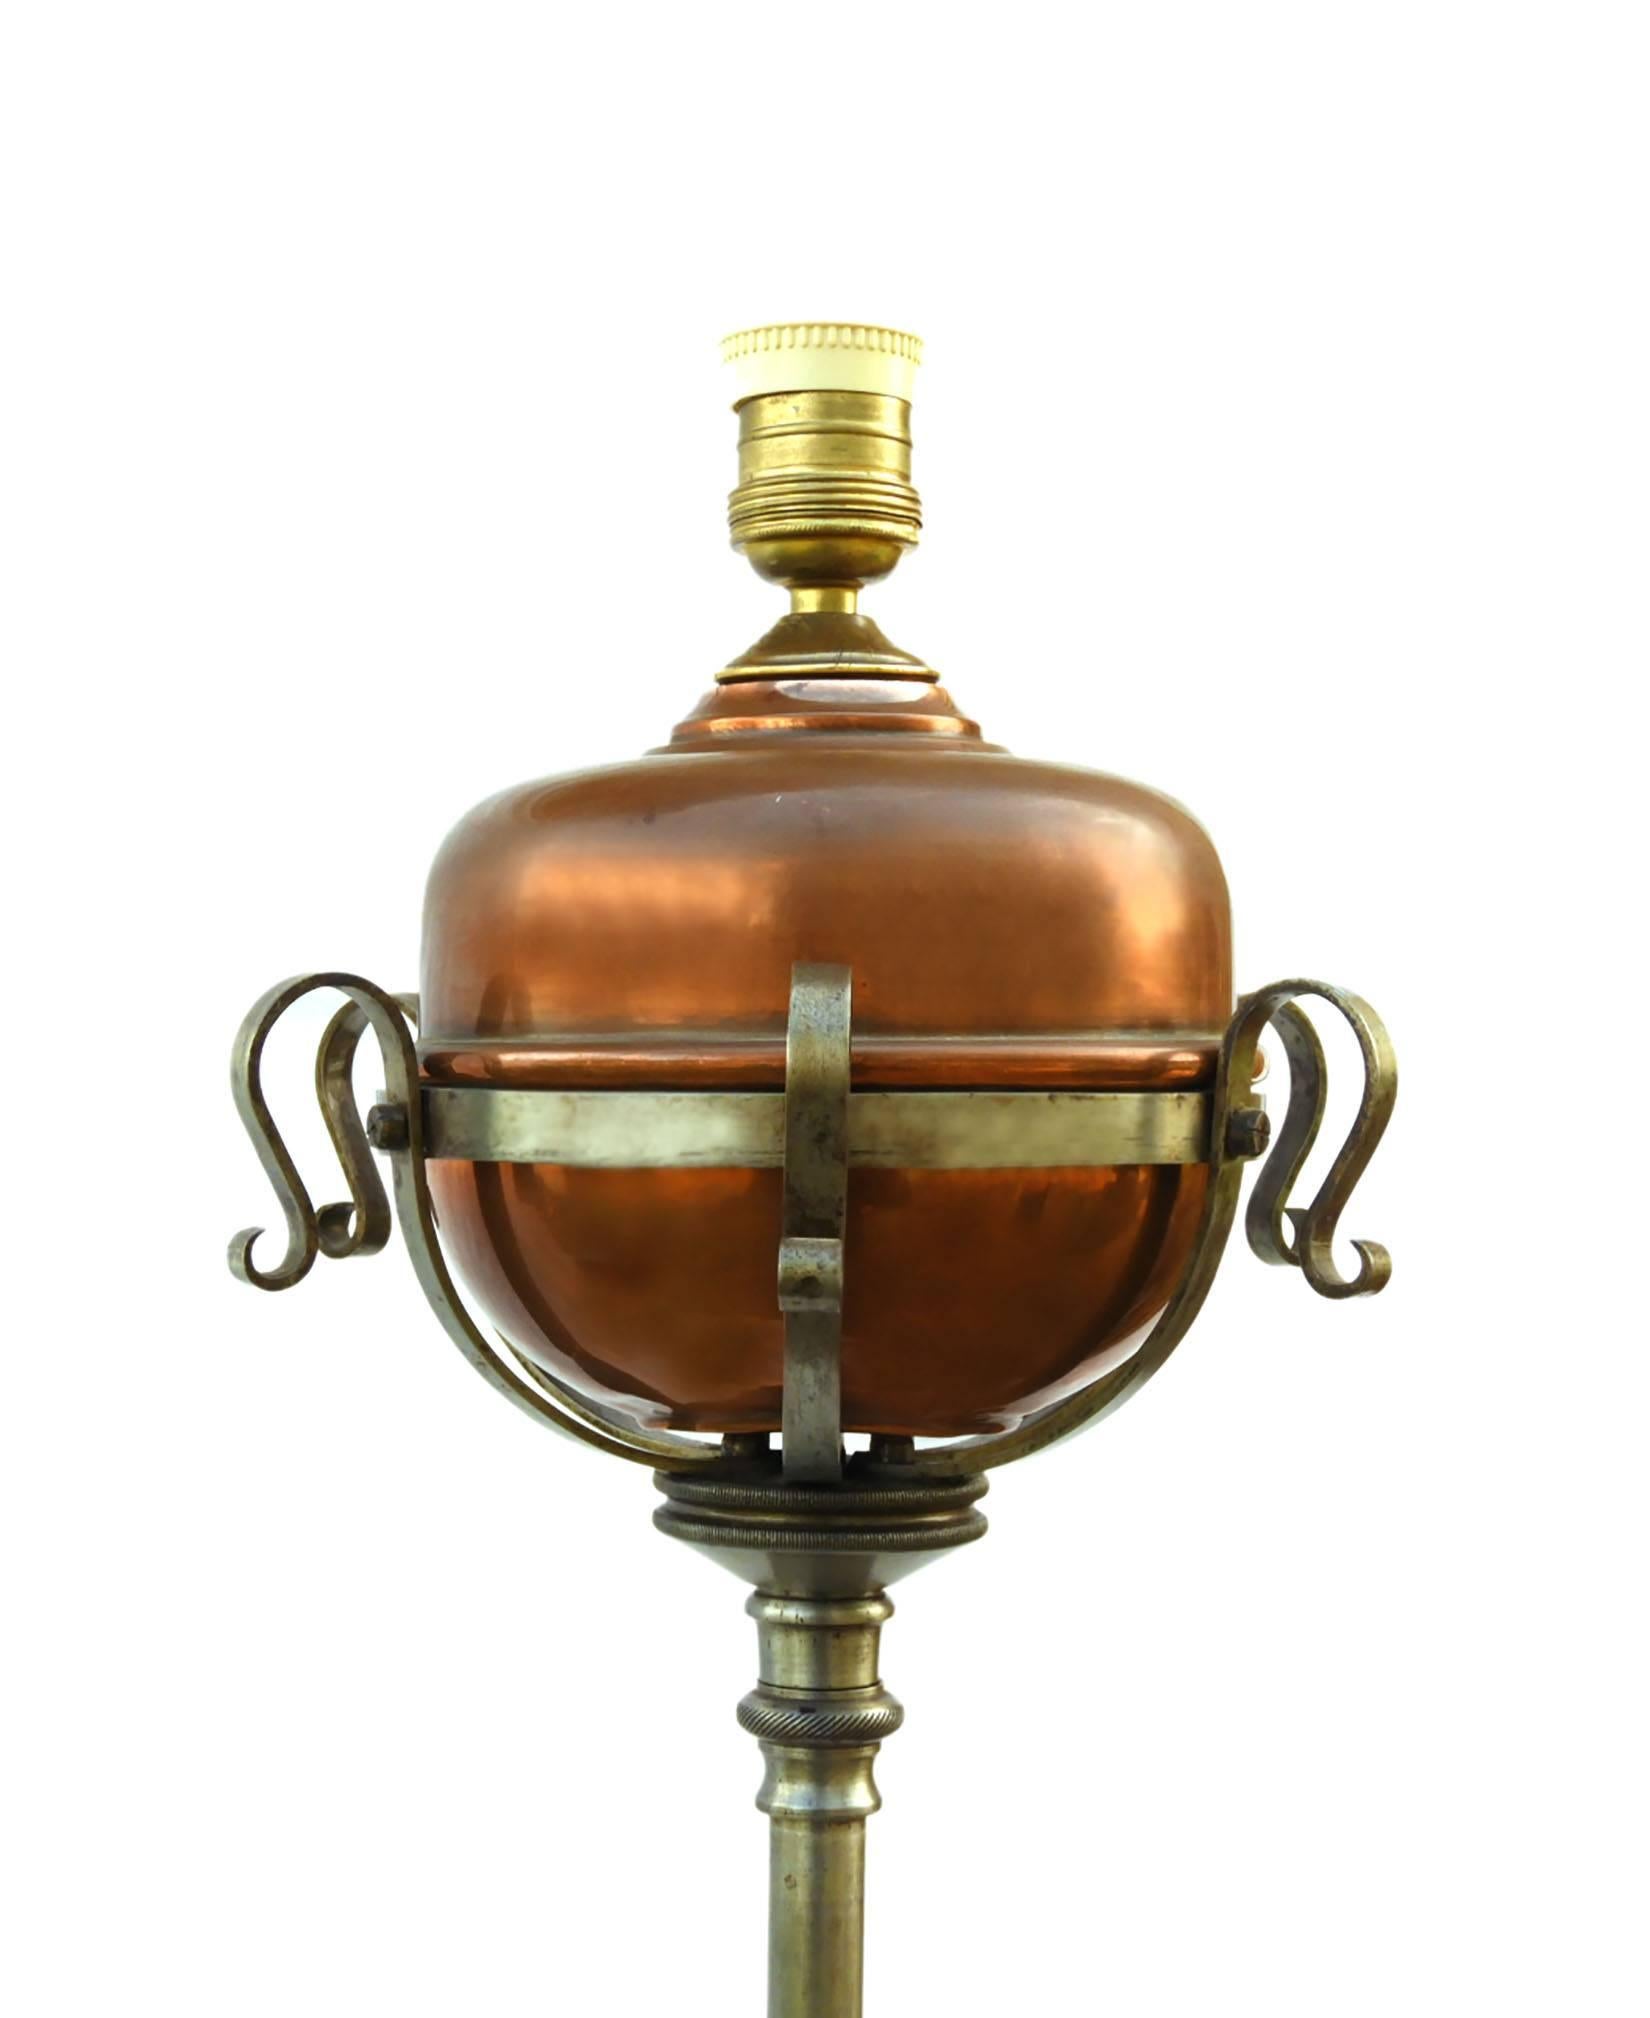 Antique Arts and Crafts floor lamp telescopic French forged steel
Adjustable telescopic standard lamp
Original oil lamp with copper reservoir later converted to electricity
It will take a lampshade of your choice or can be used as is
Measures: